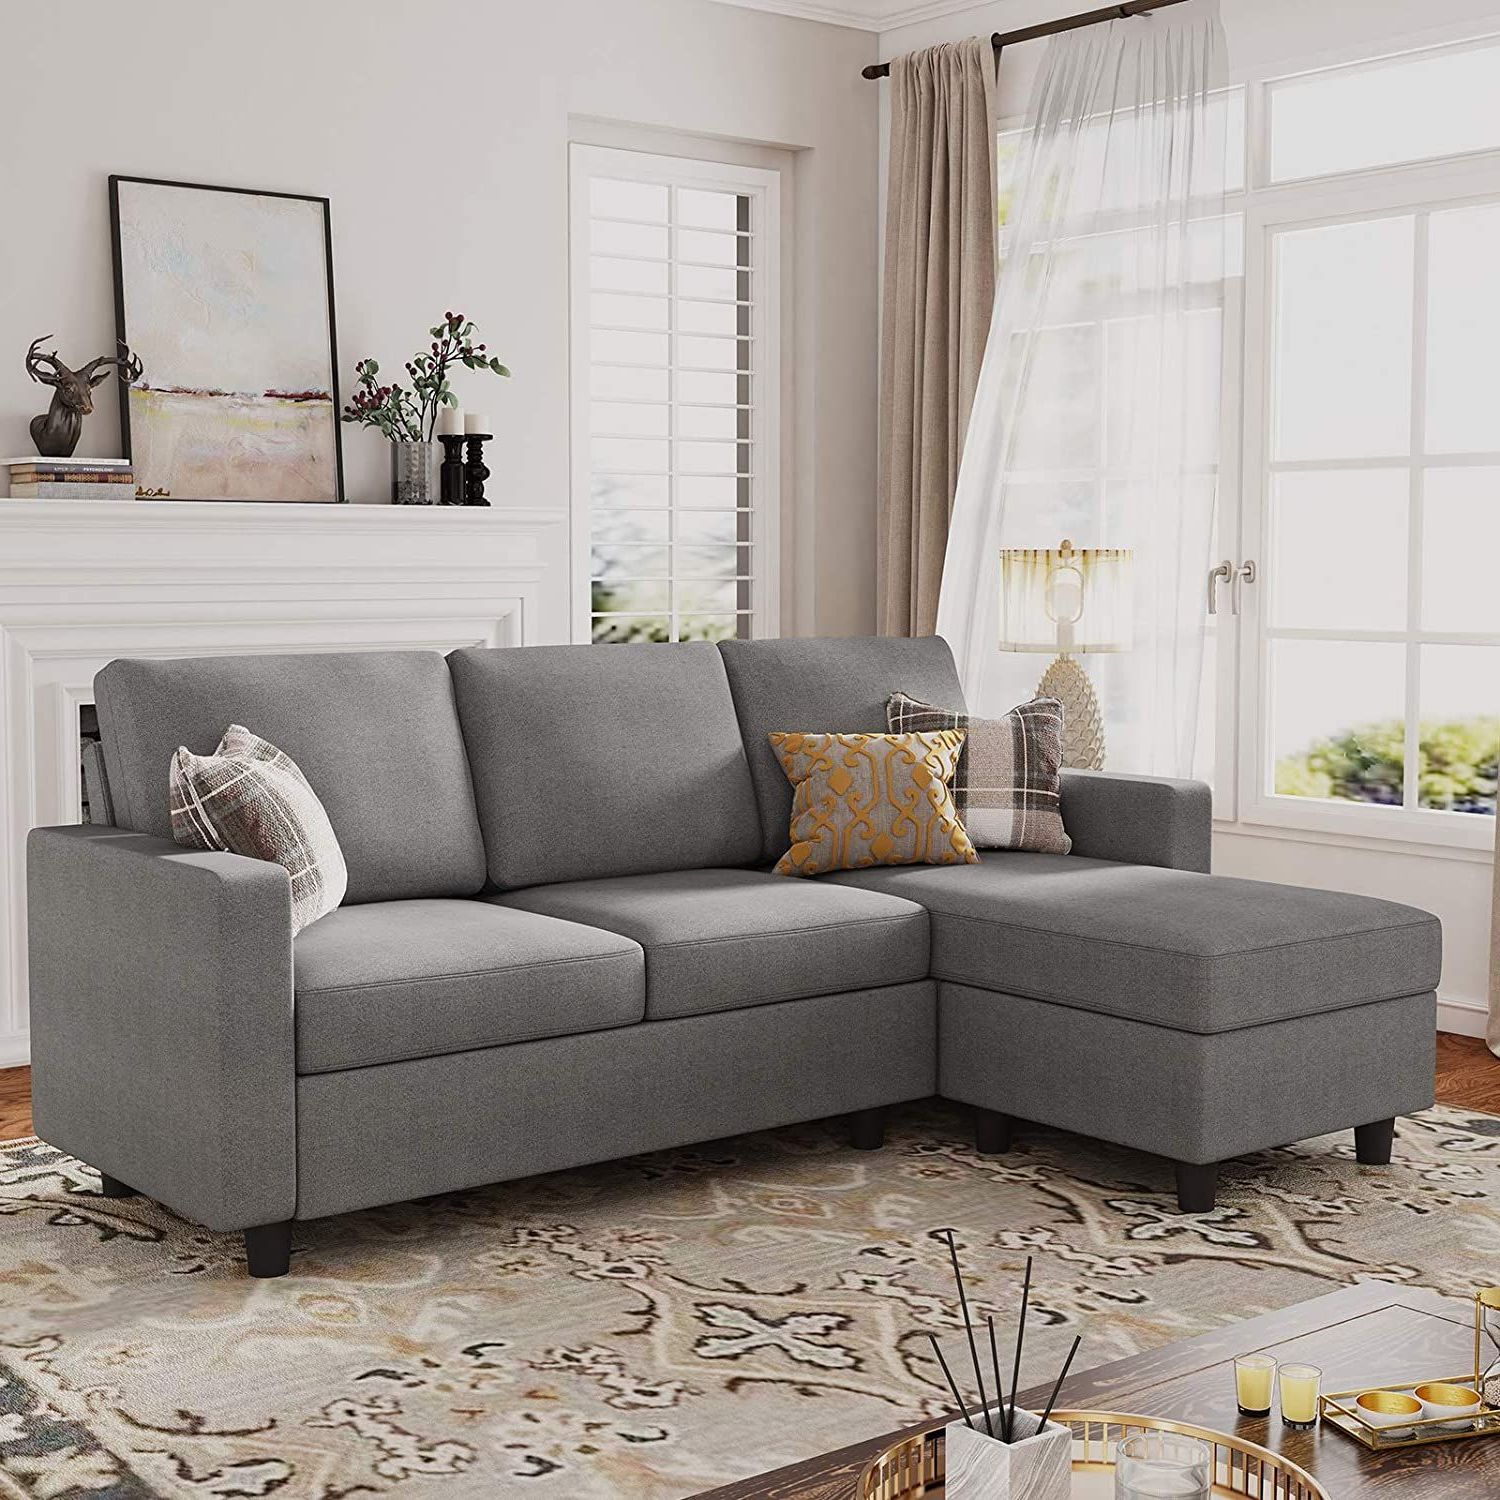 Honbay Dryades L Shaped Sectional Sofa, Gray Fabric – Walmart | Sofas  For Small Spaces, Couches For Small Spaces, Sectional Sofa Couch For L Shapped Apartment Sofas (View 6 of 20)